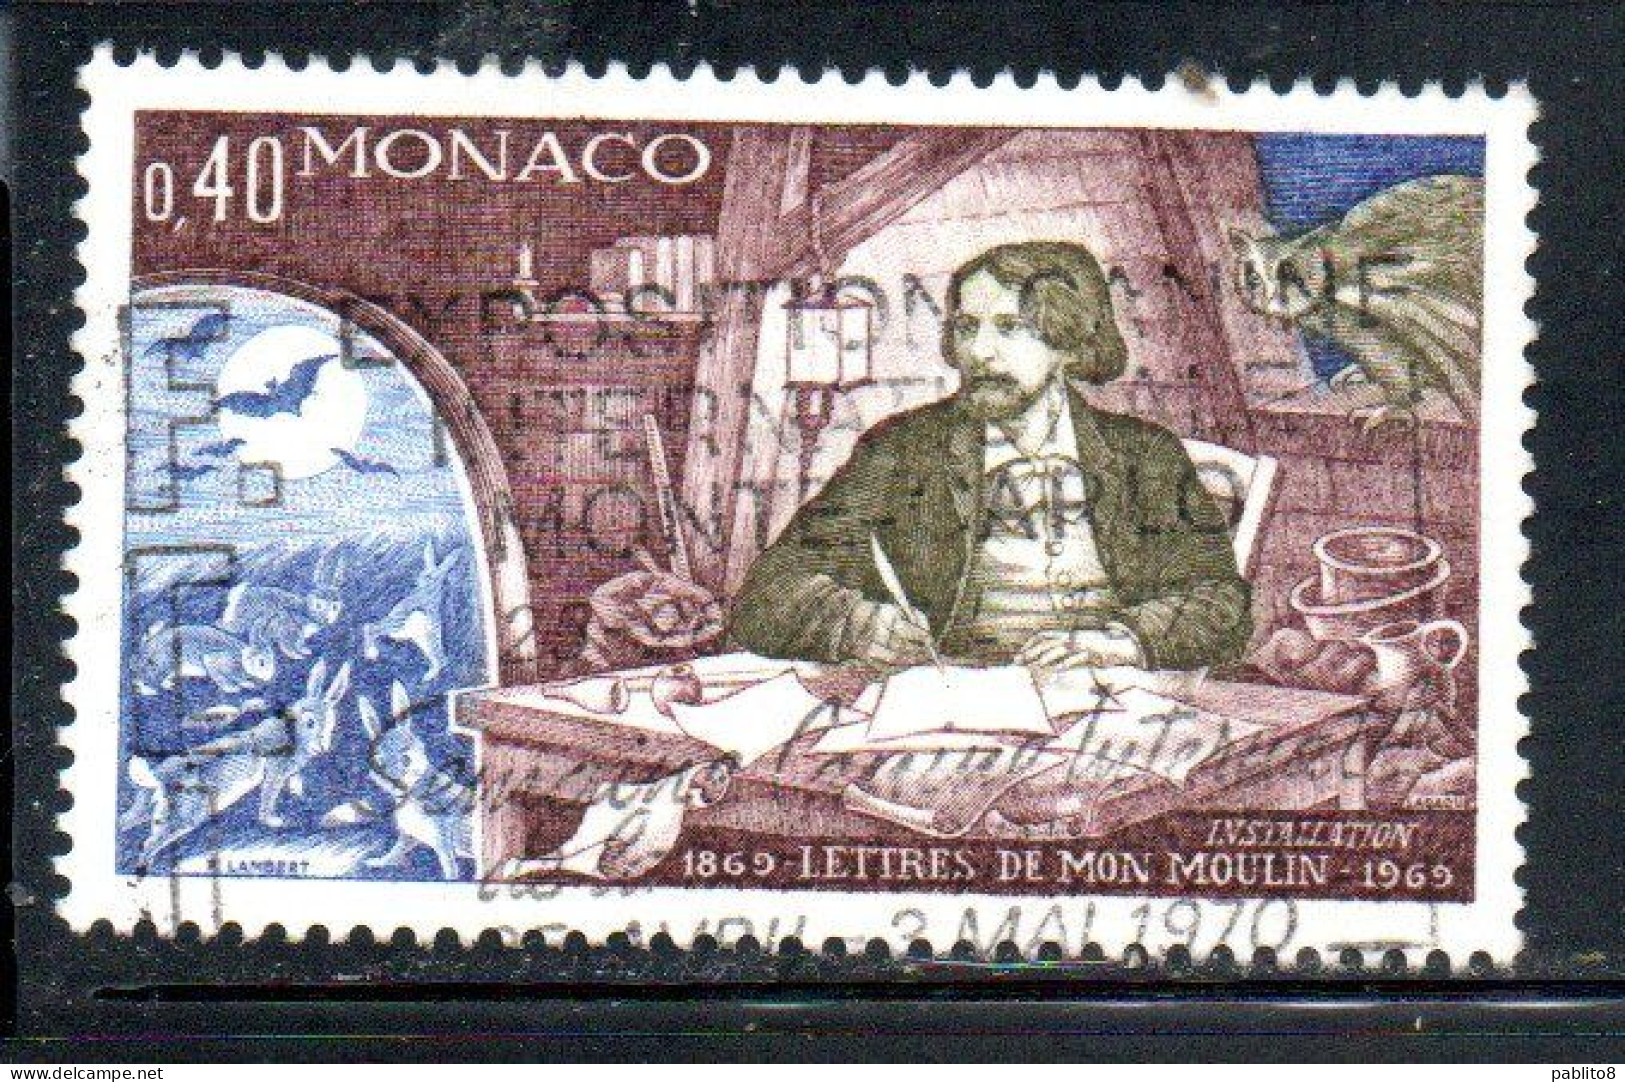 MONACO 1969 ALPHONSE DAUDET AND SCENES LETTERS FROM MY WINDMIL 40c USED USATO OBLITERE' - Used Stamps